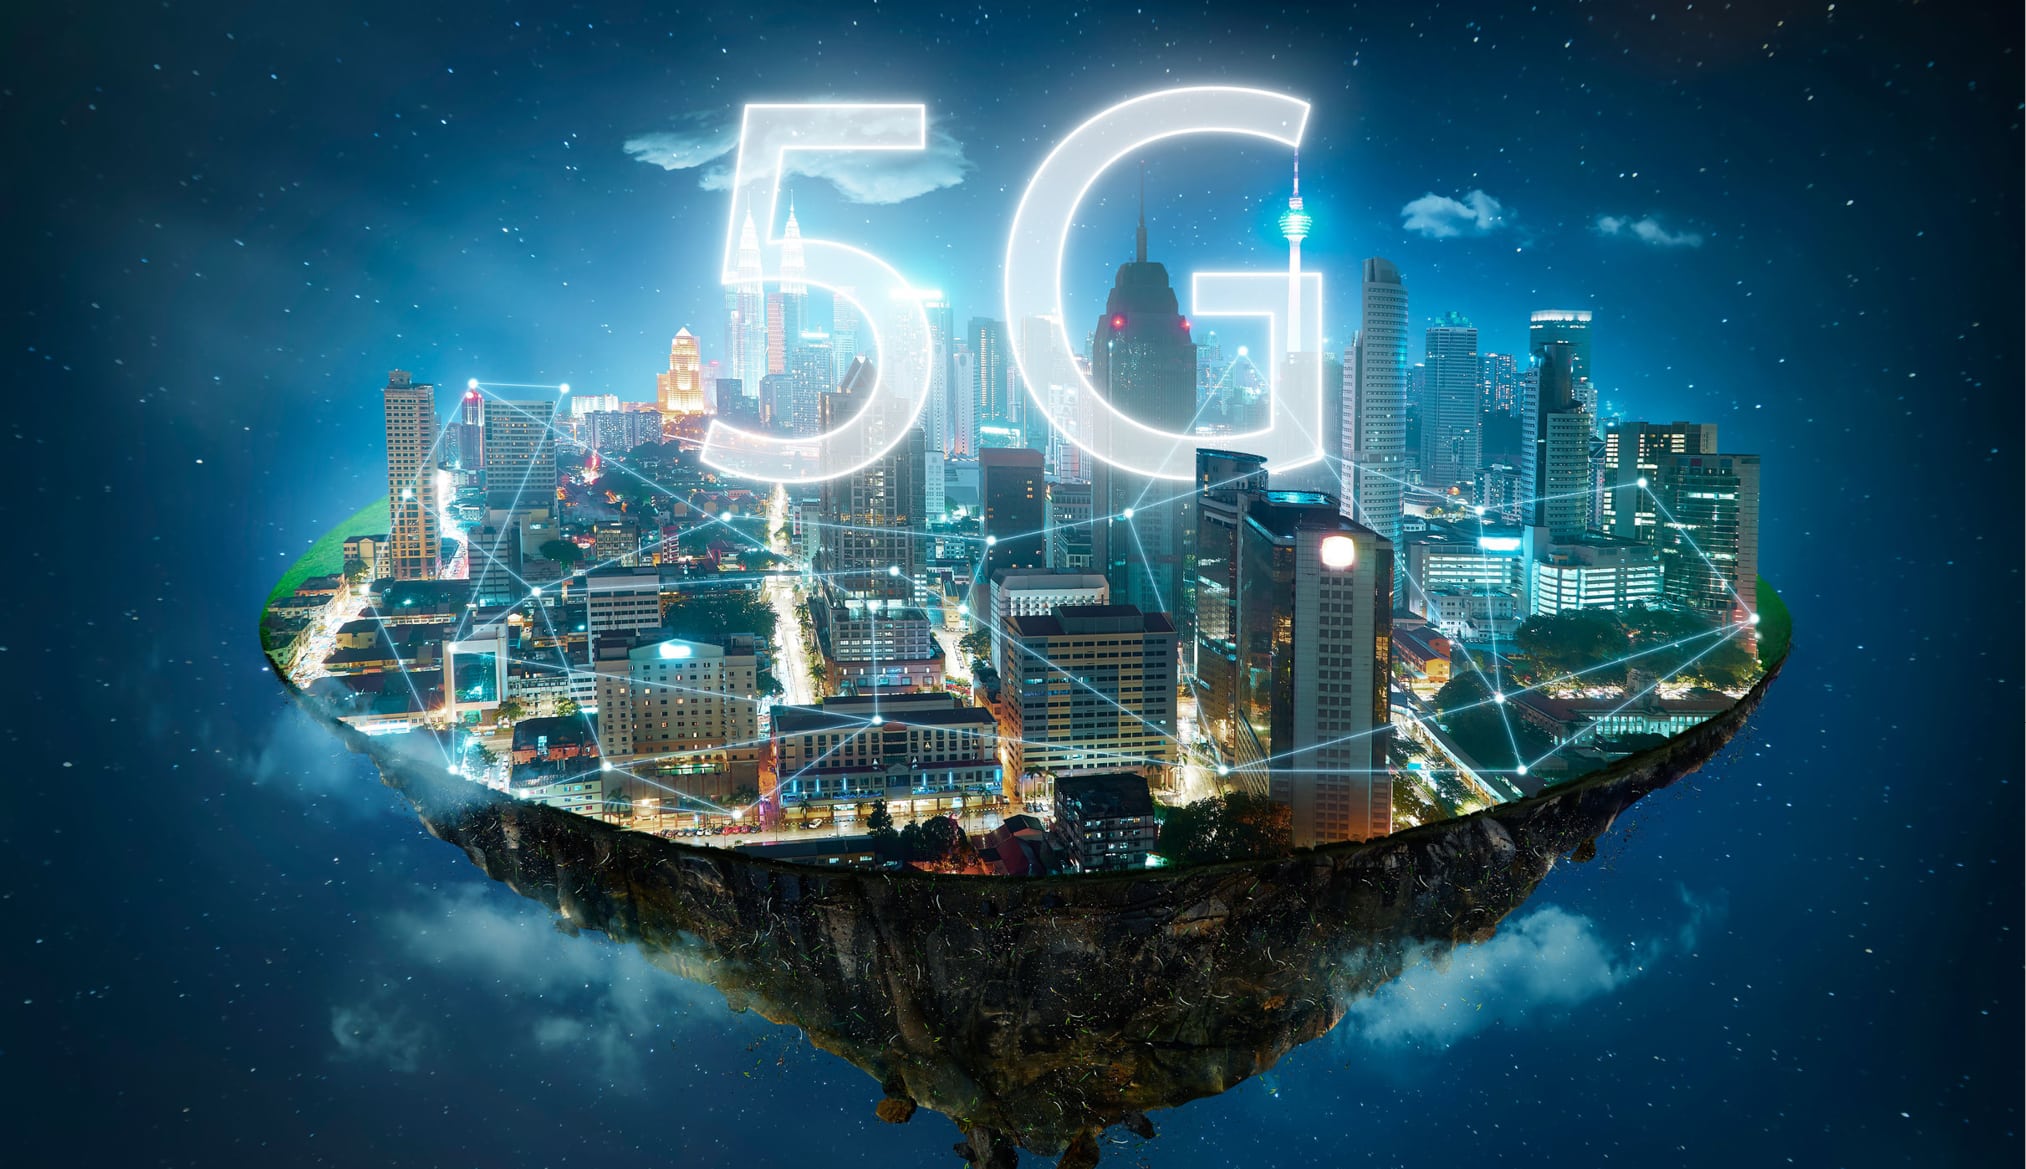 Large-Scale Convergence, A 5G Way